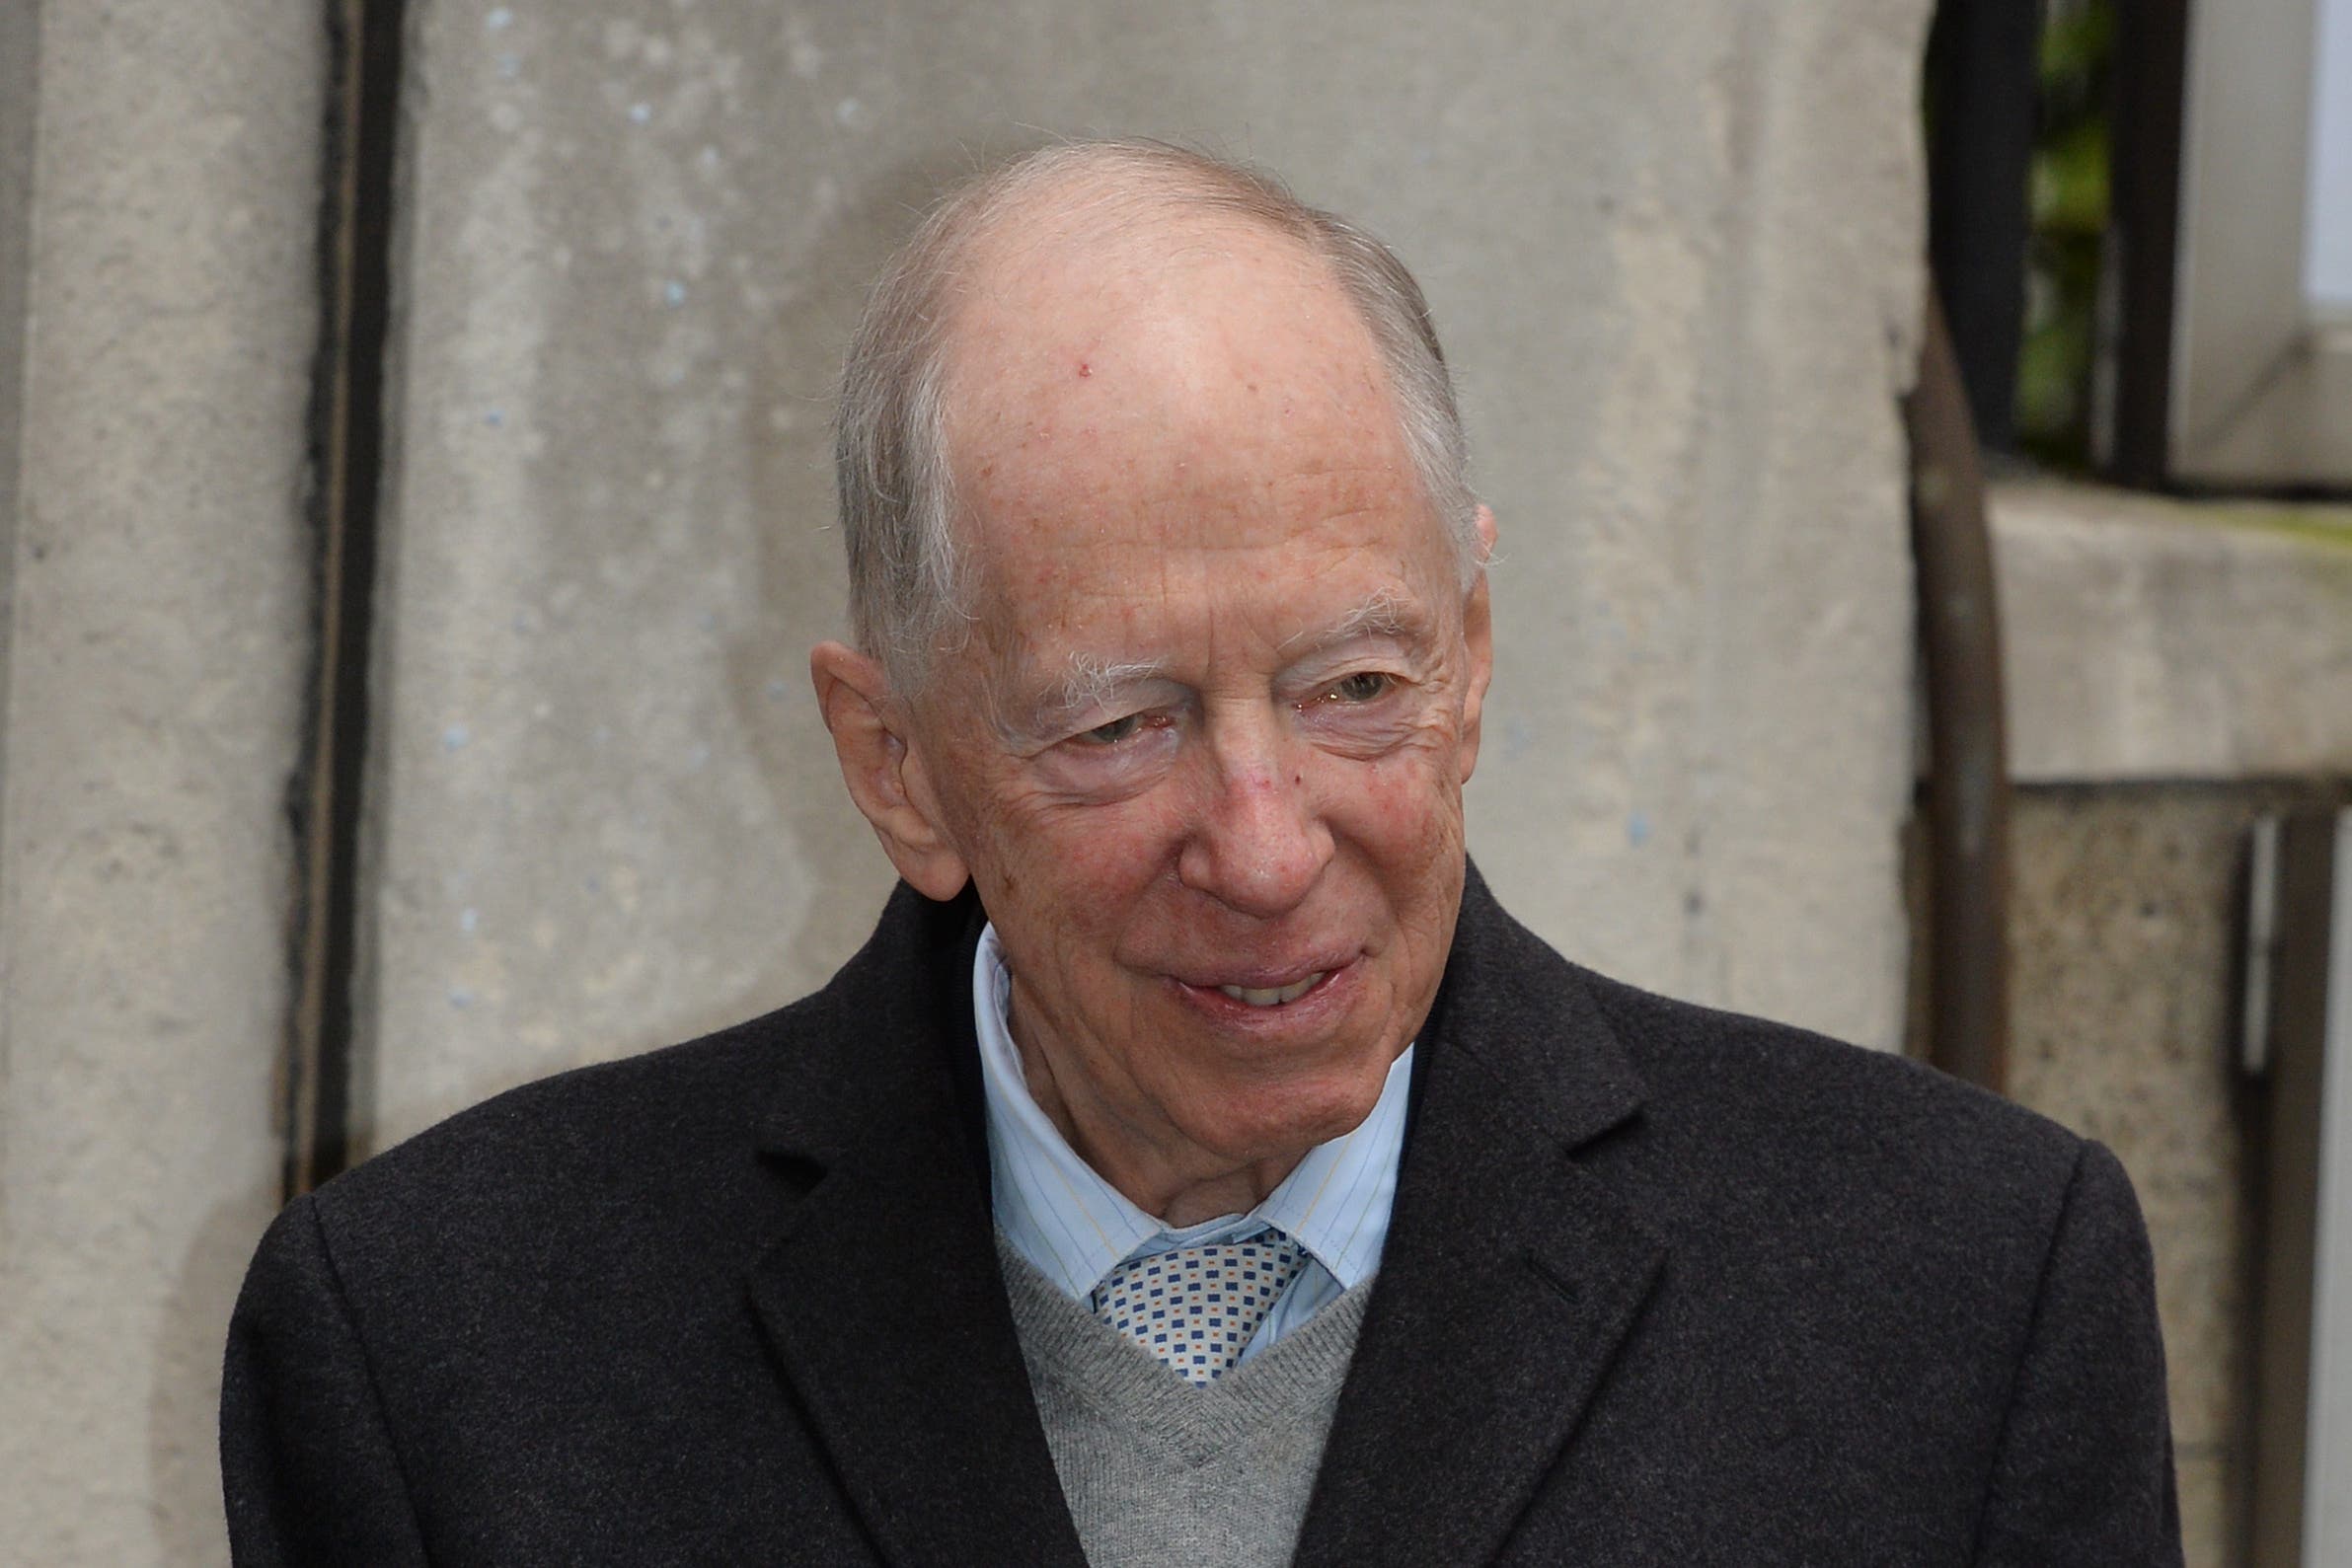 Obituary and Funeral of Jacob Rothschild: Details of him Death - Jacob Rothschild cause of death? What Happened to him? 2